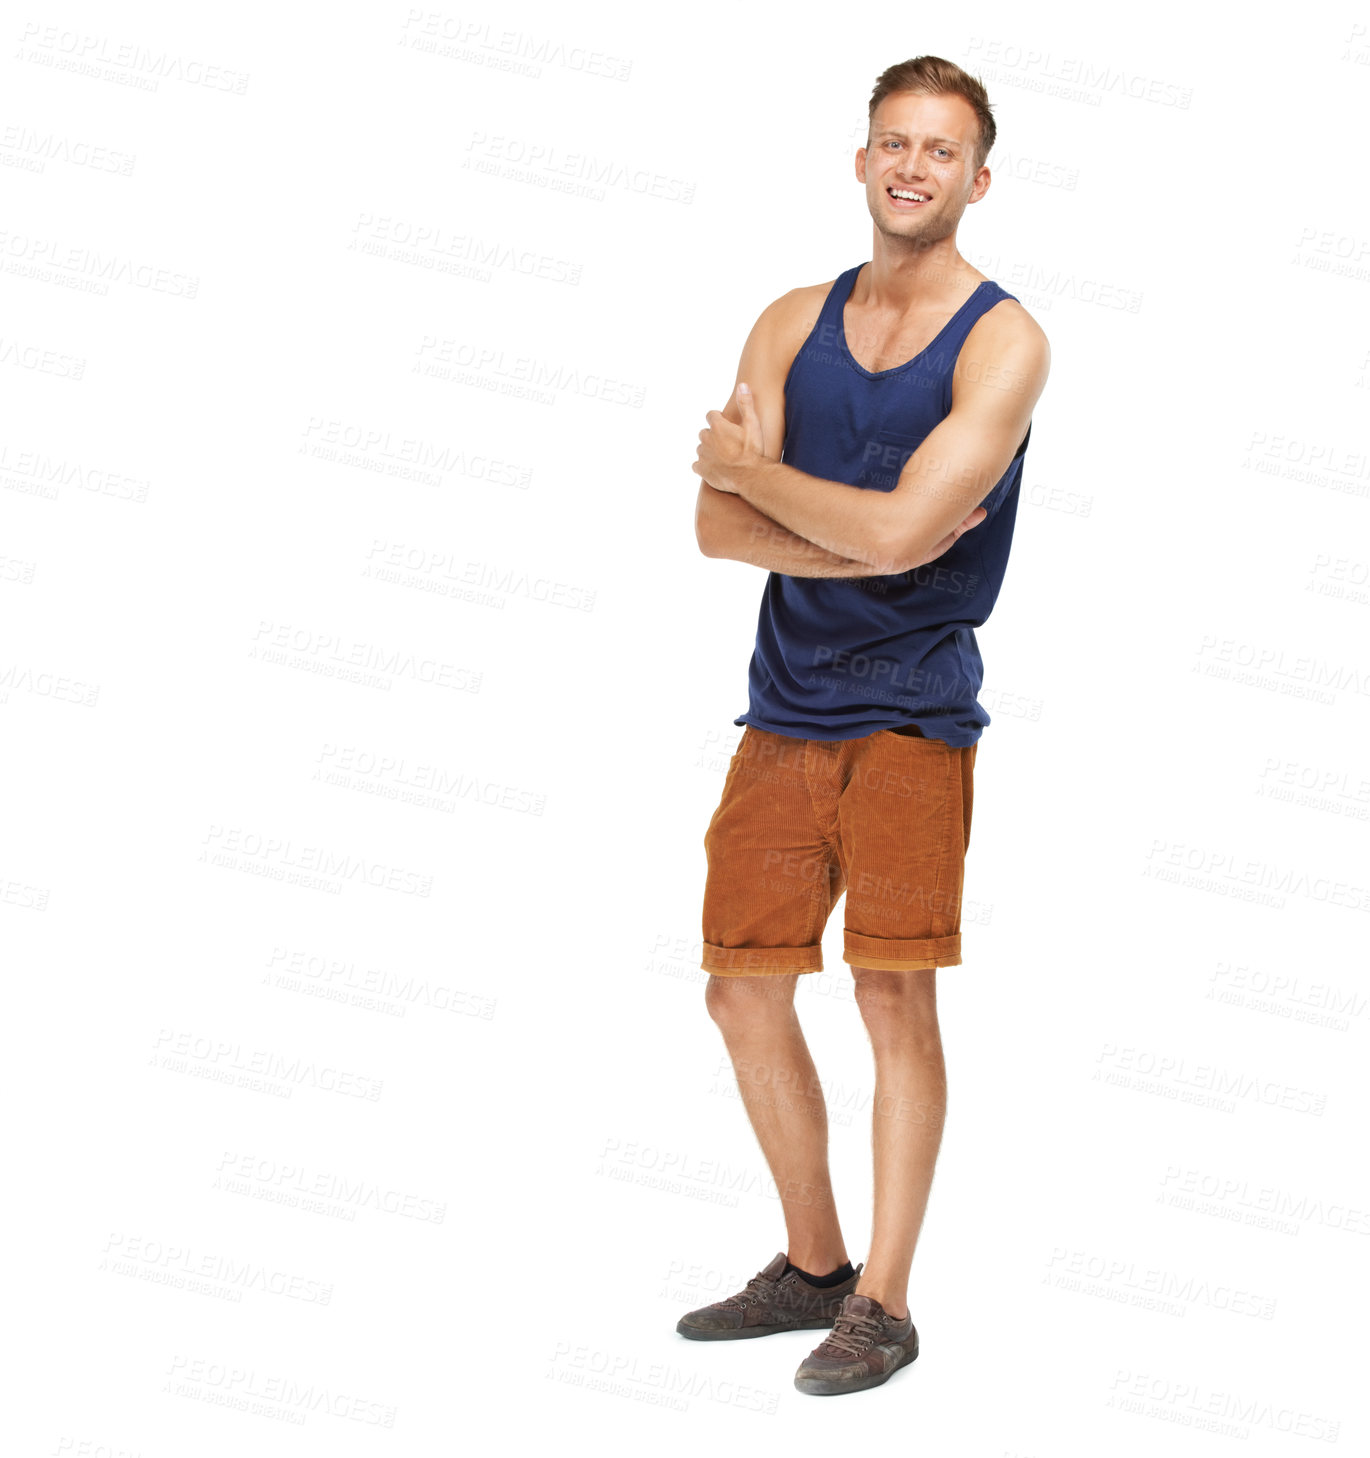 Buy stock photo Studio portrait of a smiling young man isolated on white